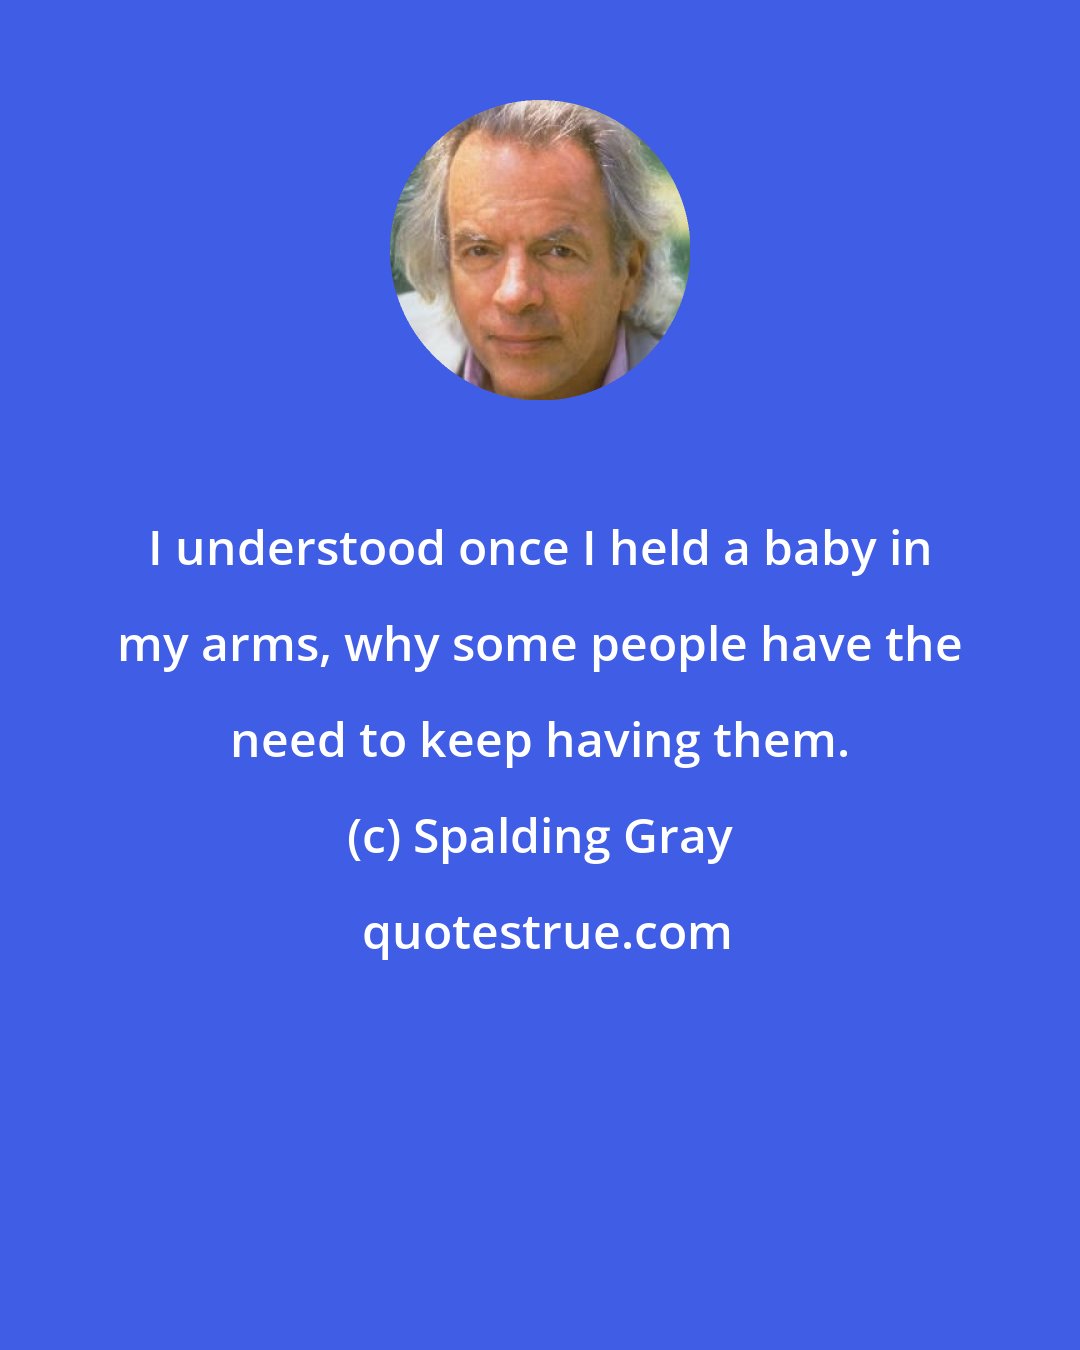 Spalding Gray: I understood once I held a baby in my arms, why some people have the need to keep having them.